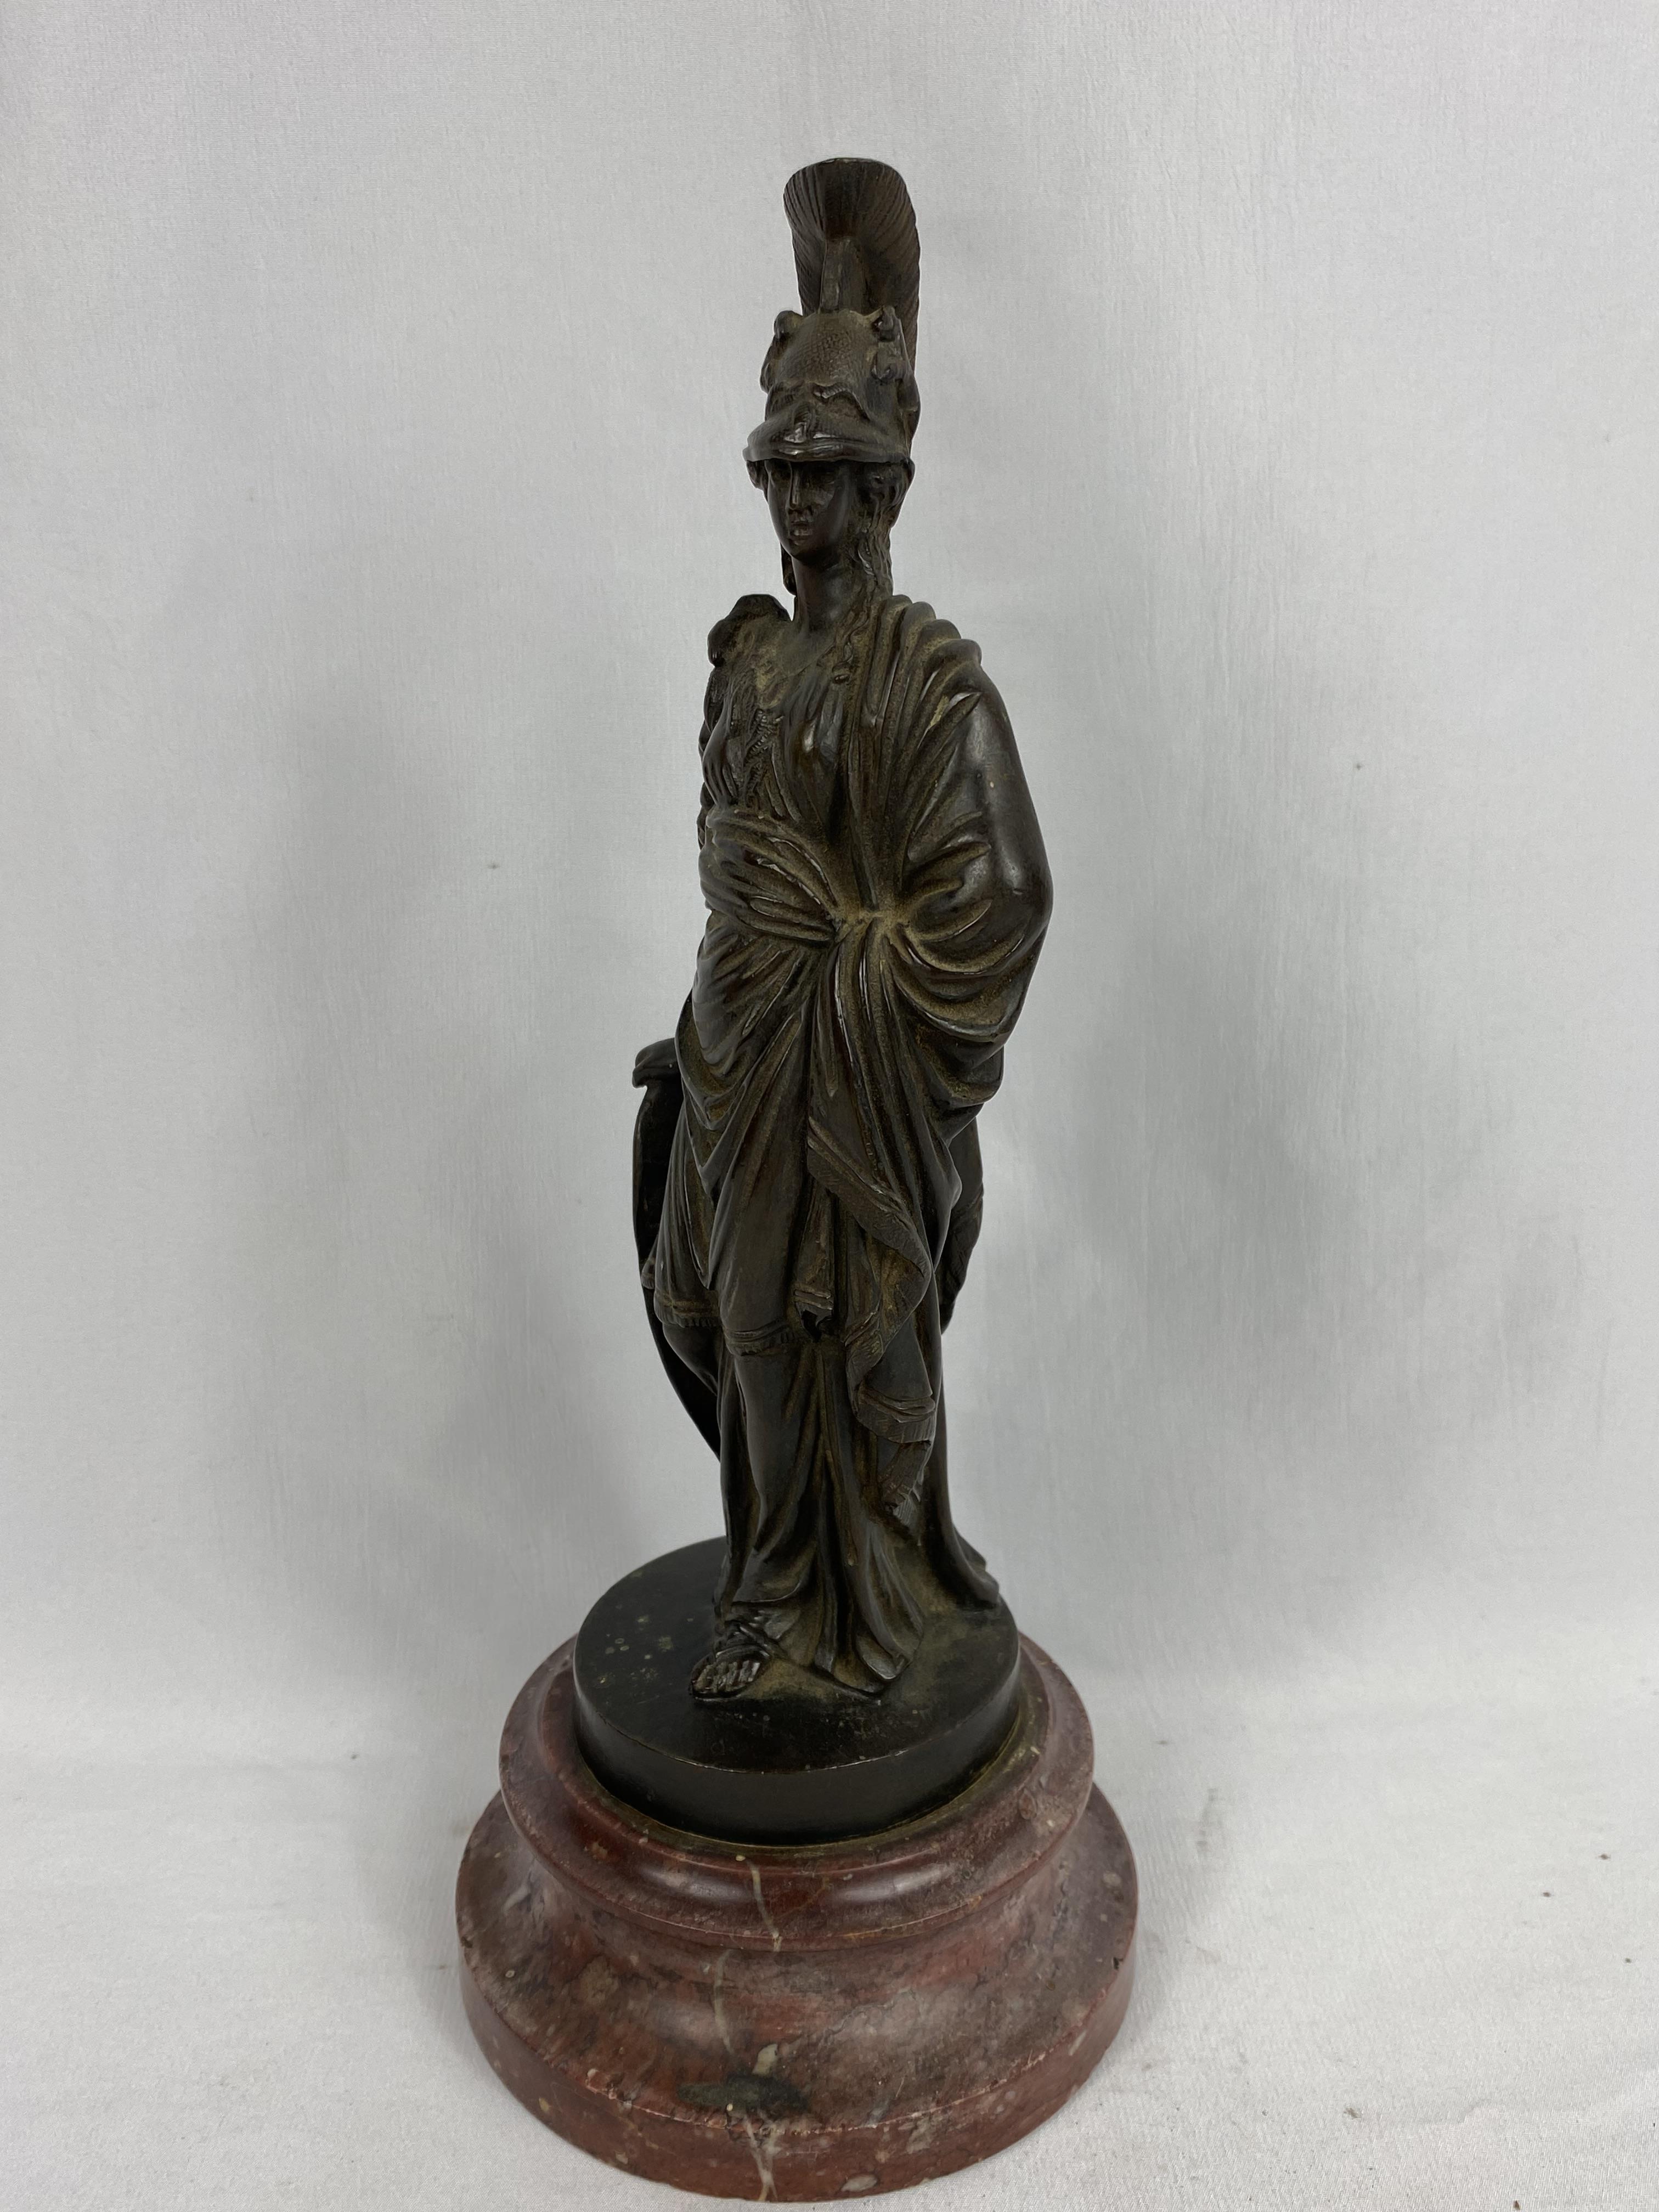 Bronze figurine of Athena on marble base. From the Estate of Dame Mary Quant